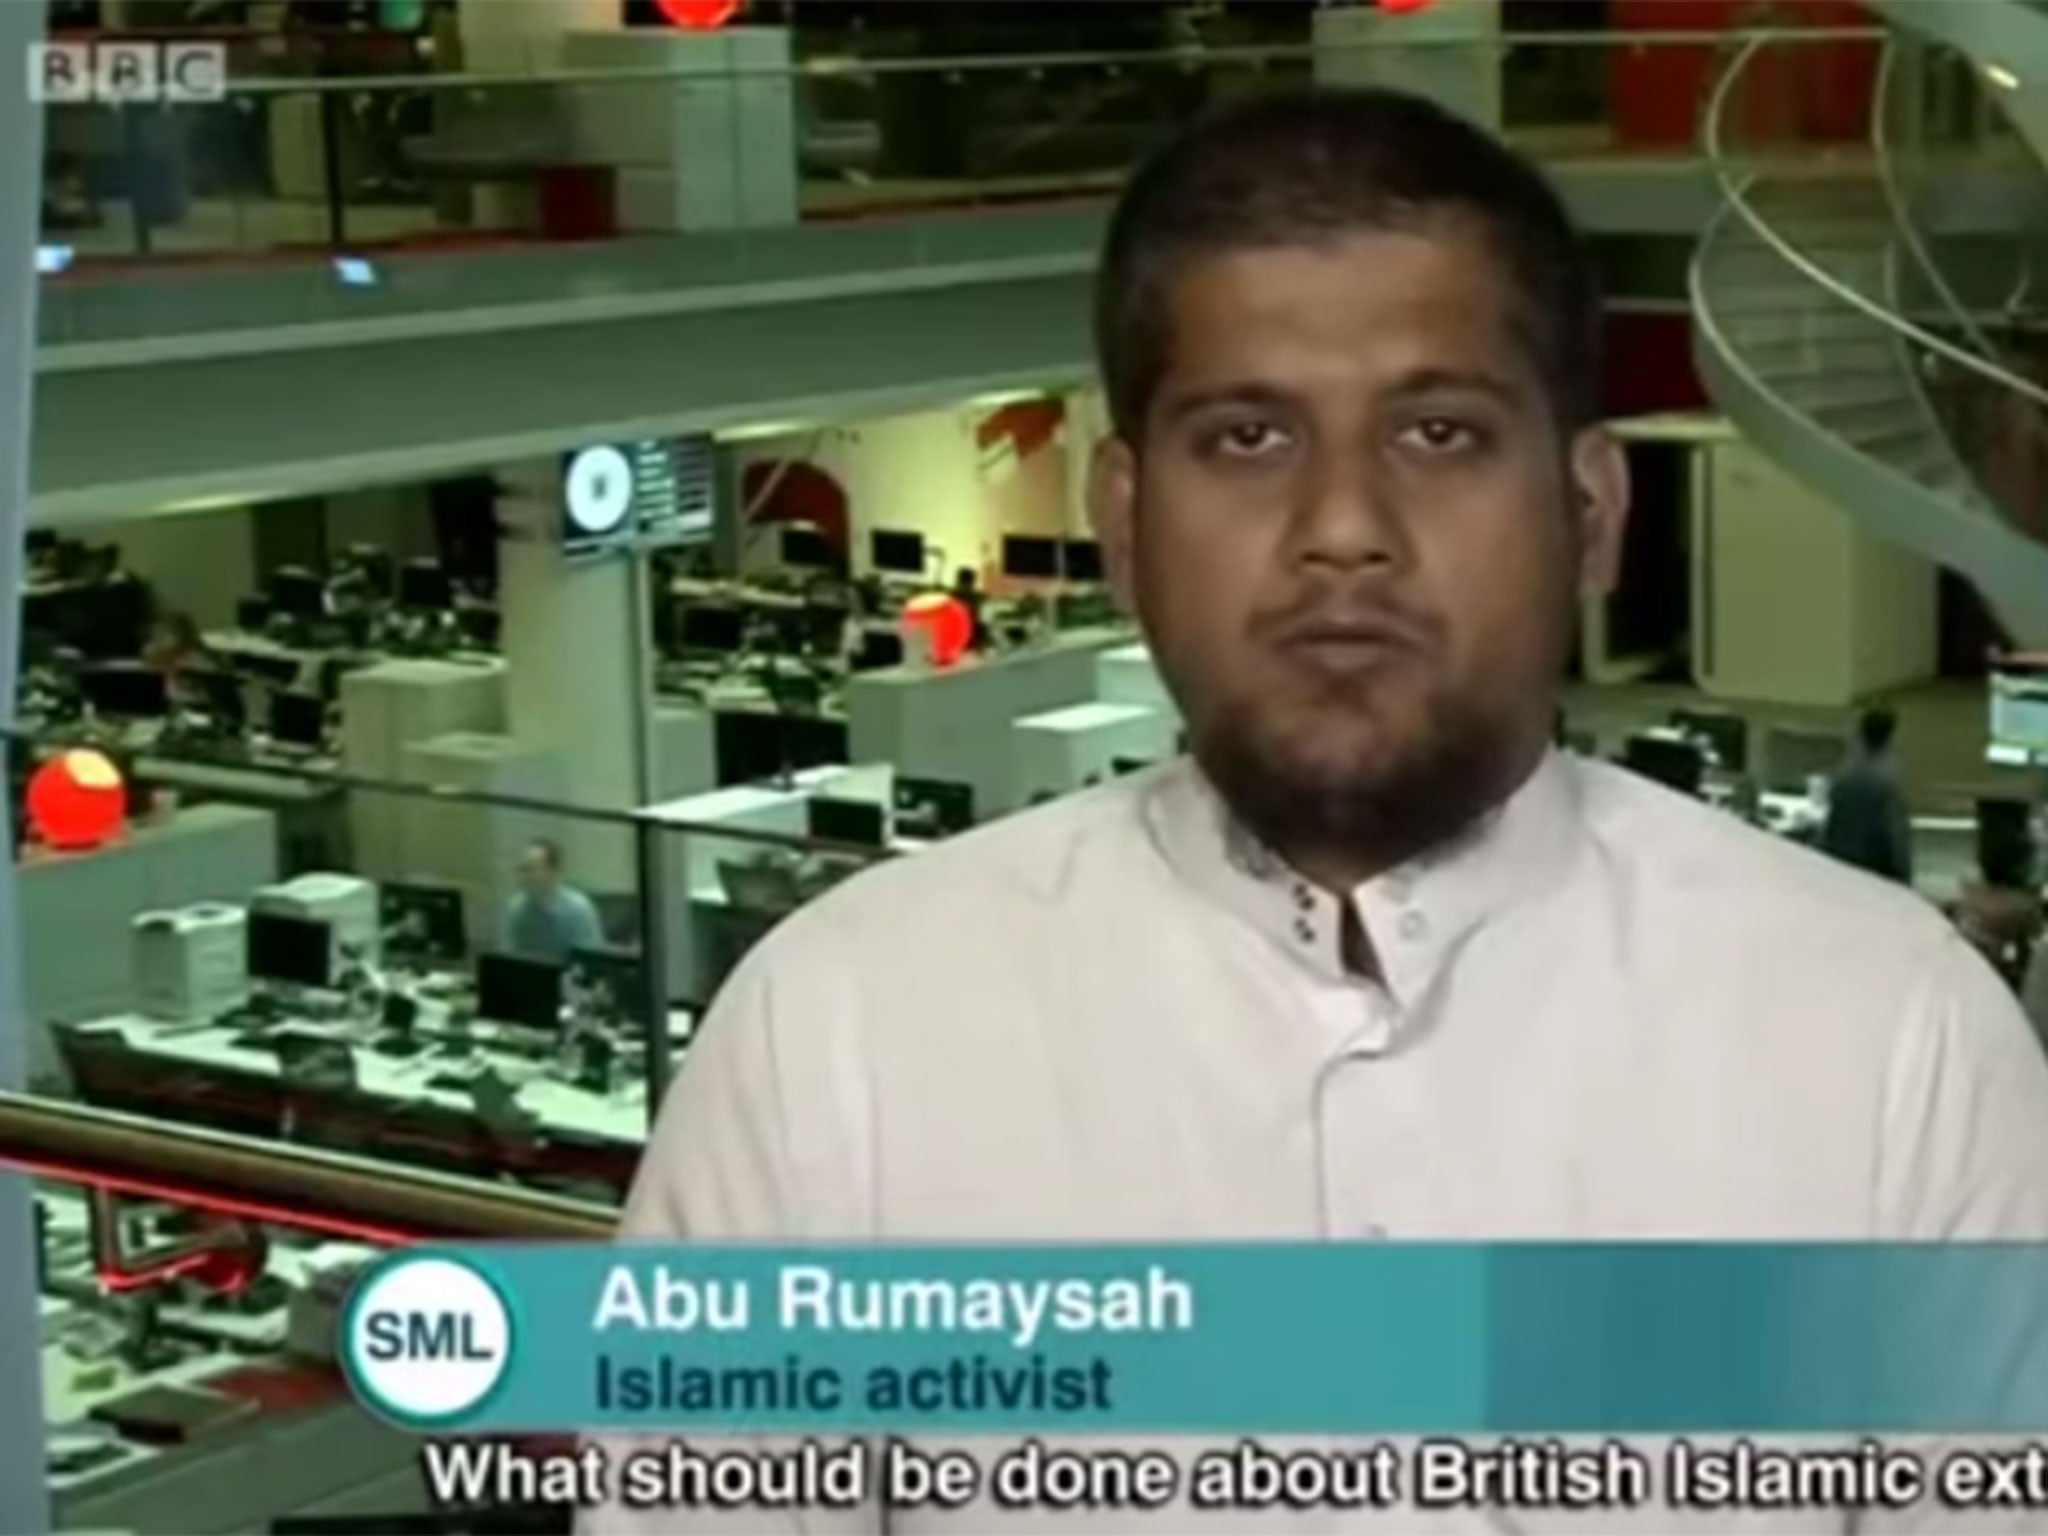 Rumaysah speaks from the BBC's headquarters during a panel debate on Sunday Morning Live